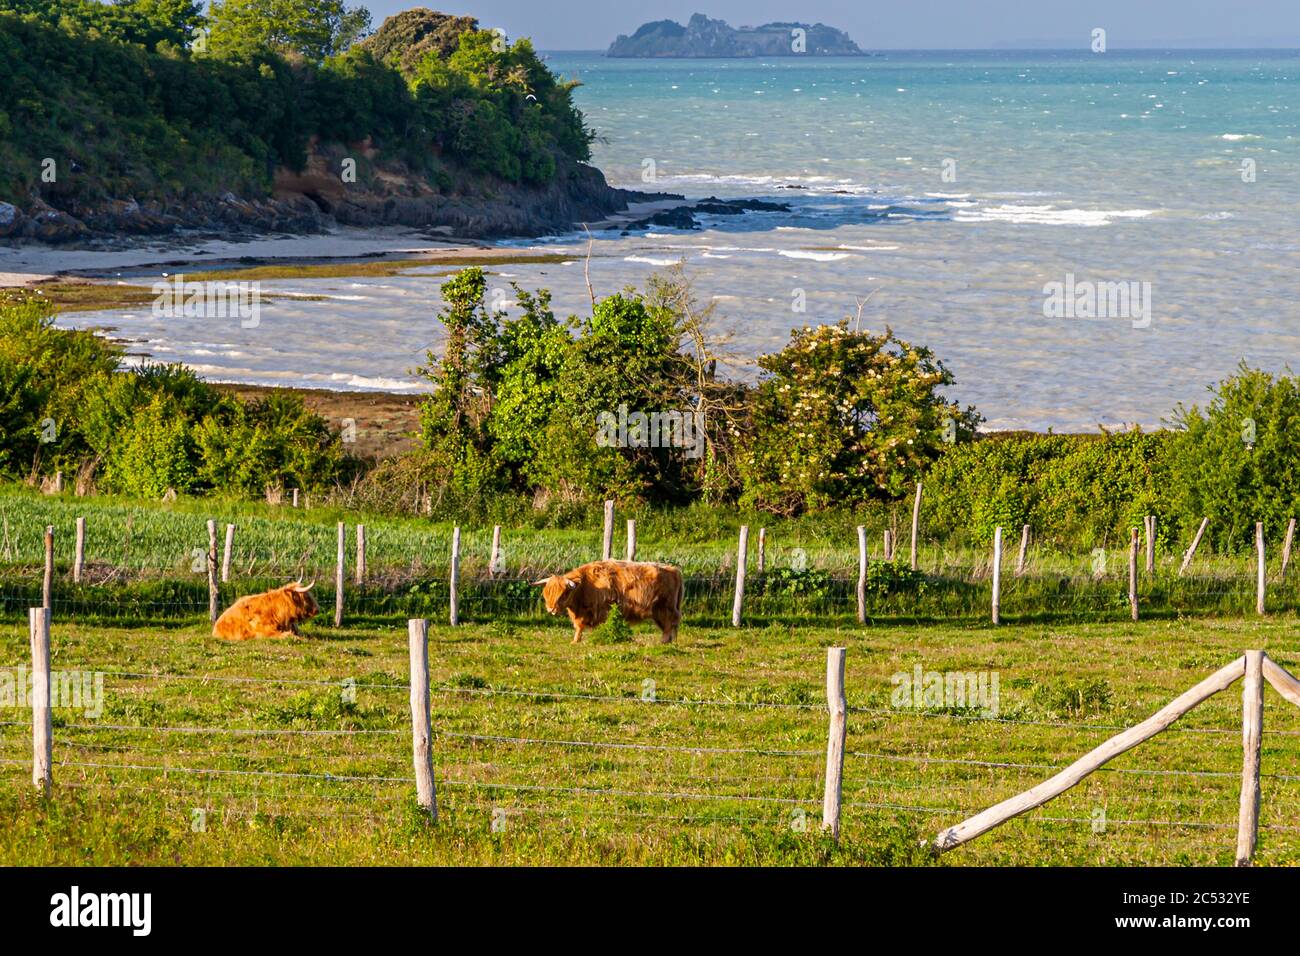 View over the 'Field of the Wind' towards Cancale, the center of oyster farming in the region. Ferme du Vent near Château Richeux, Saint-Malo, France Stock Photo